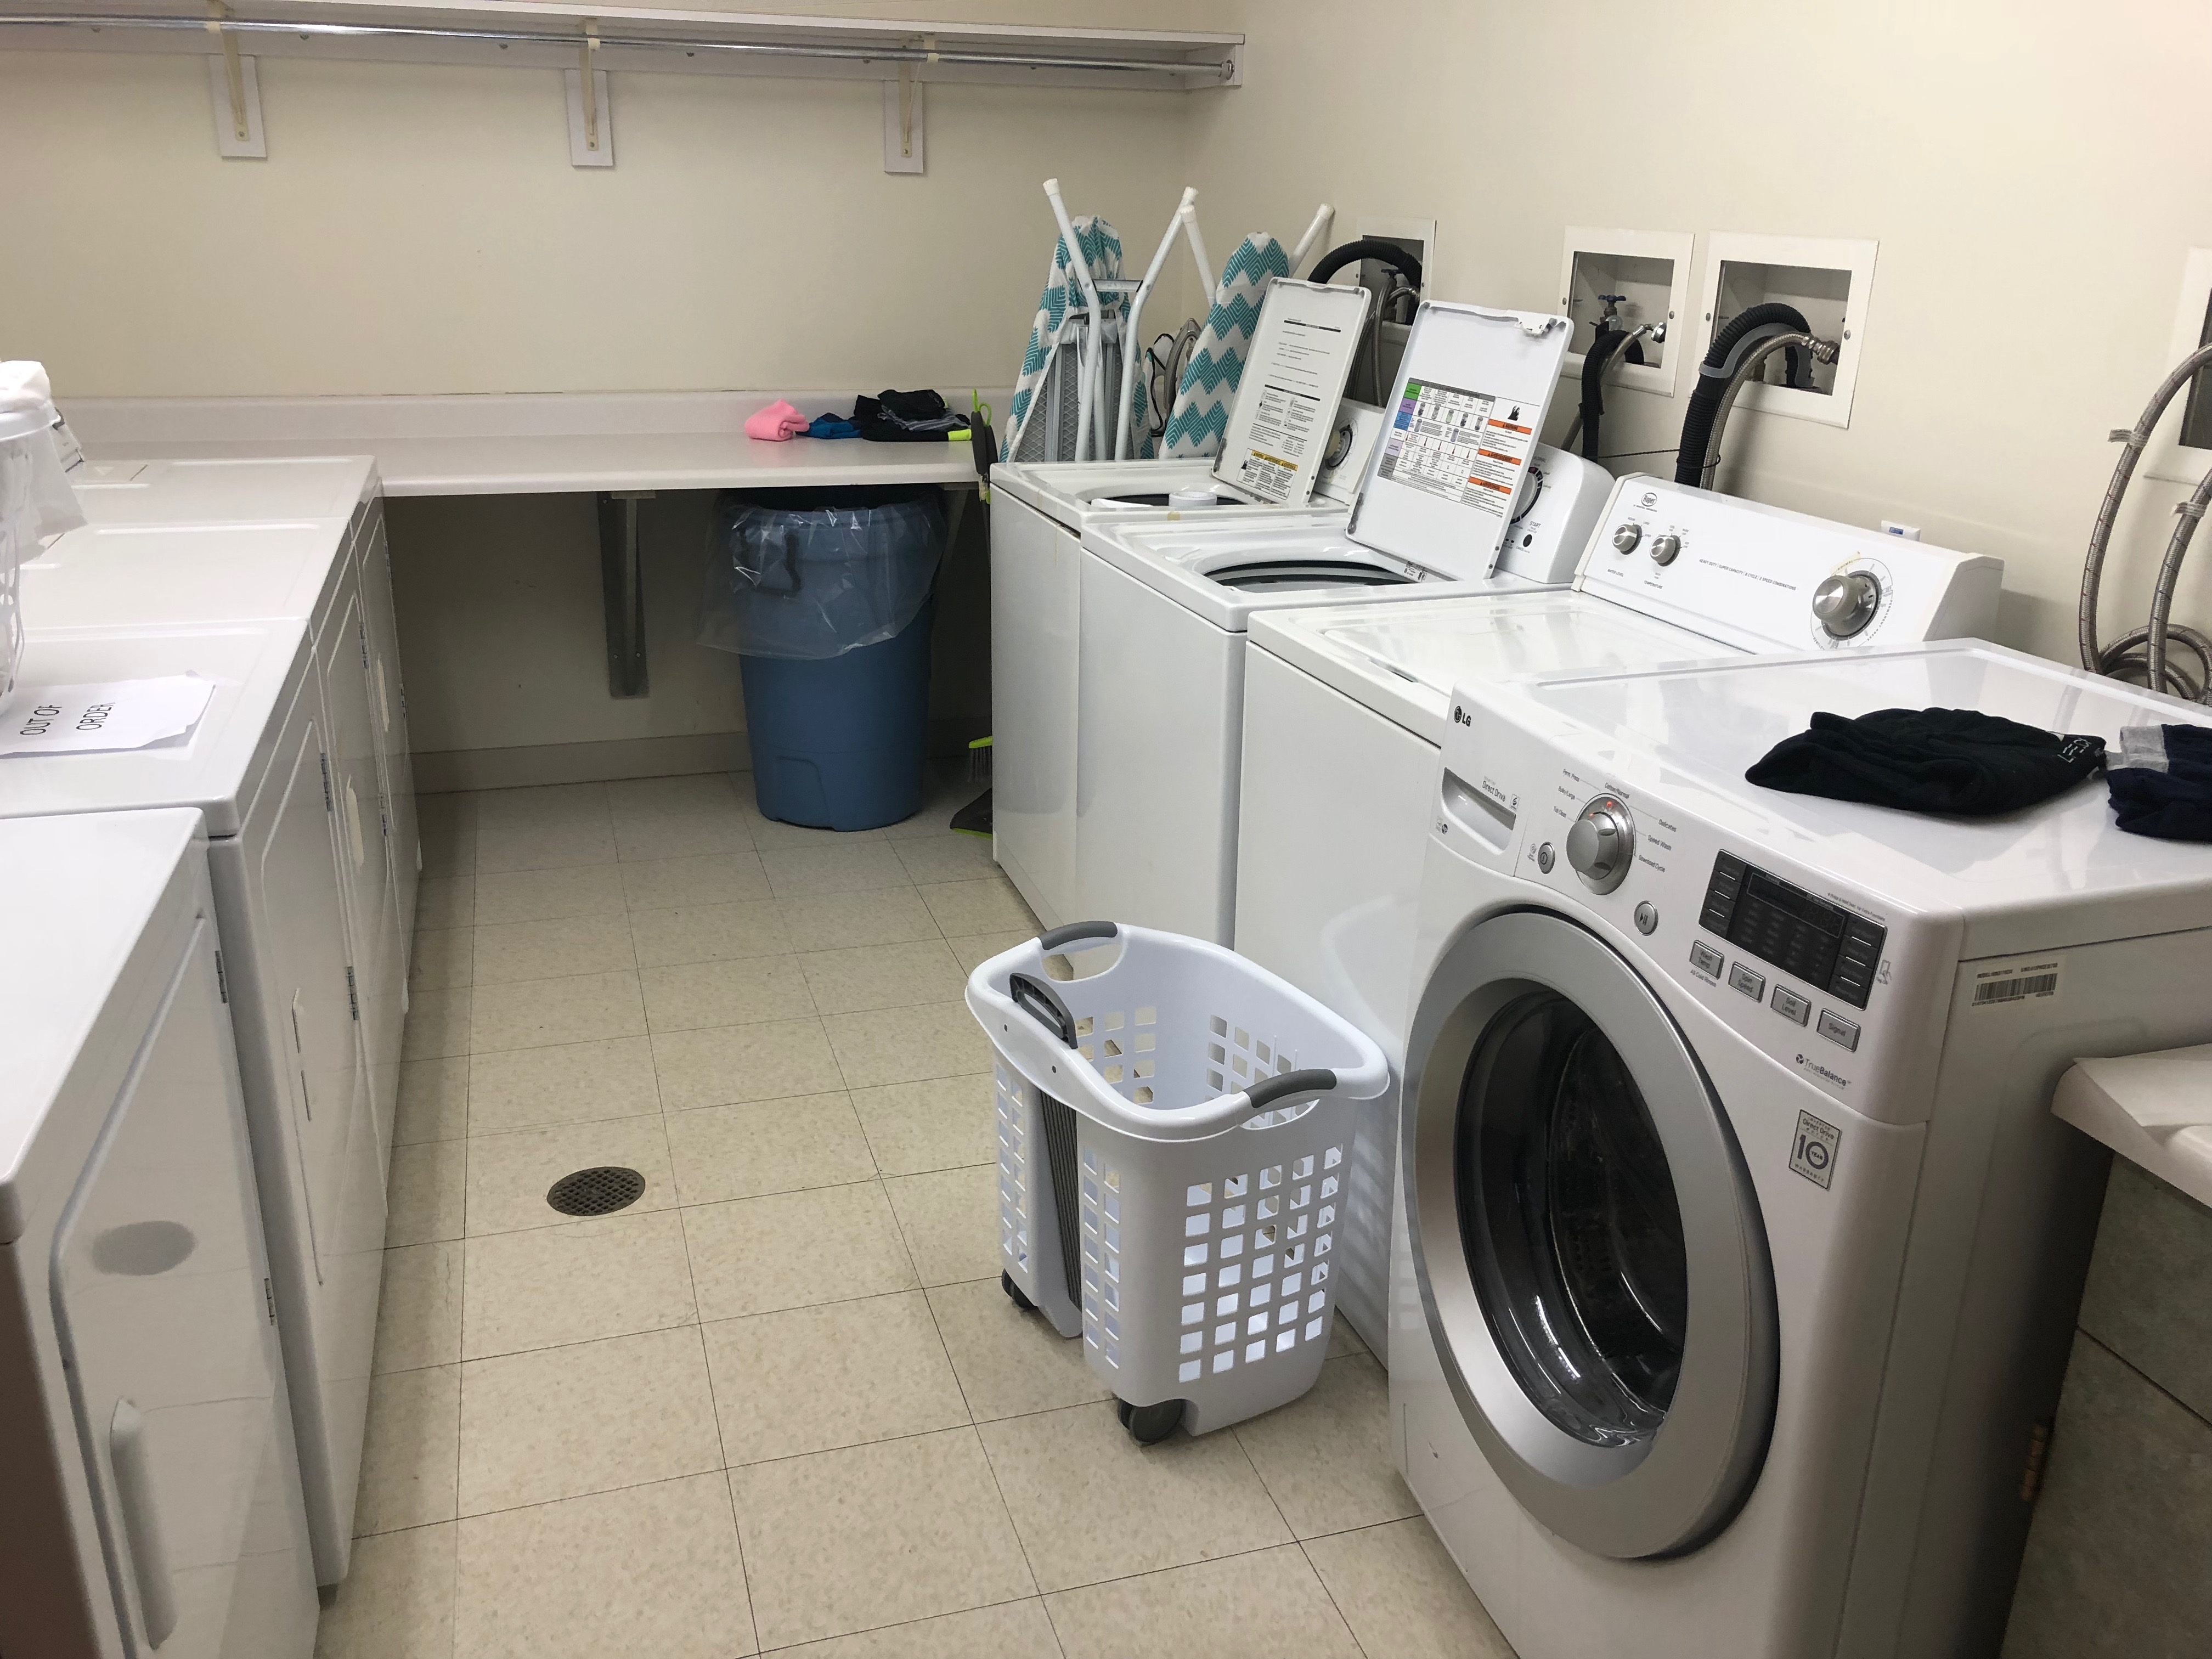 On the right is 4 washing machines. One is front loading and 3 are top loading. A laundry basket is on the floor in front of washer. Left side is 4 dryers. A long rectangular table runs along the back wall for folding clothes. 2 ironing boards are on right between washing machine and table.